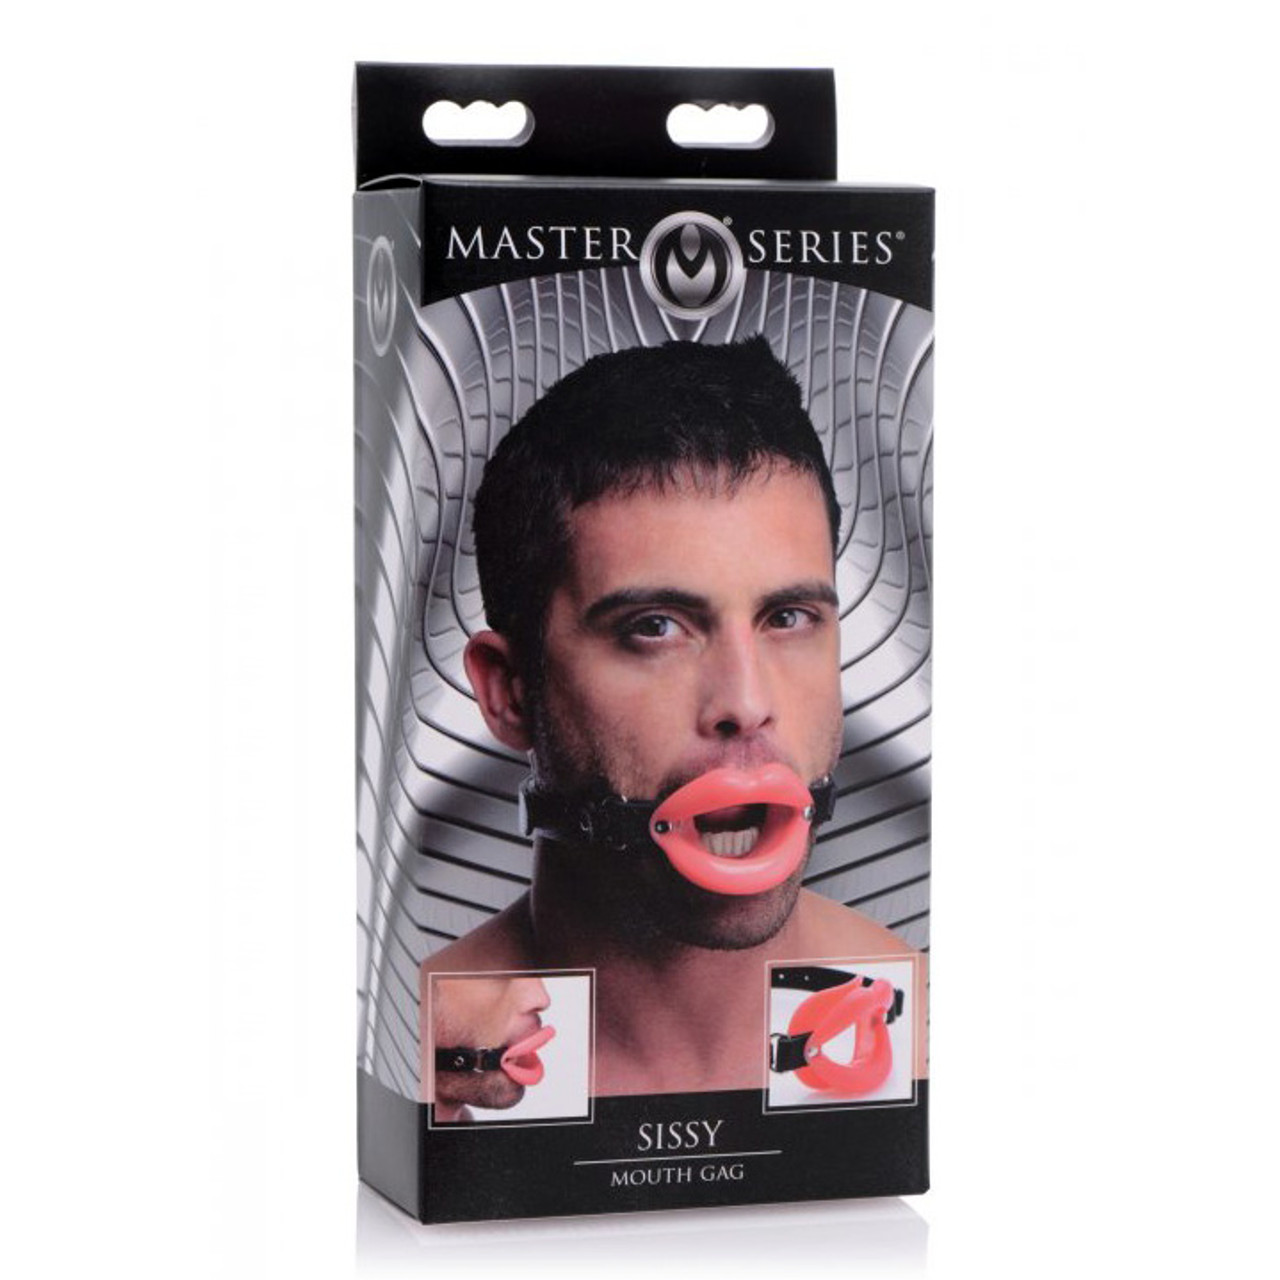 Master Series Sissy Lips Silicone Mouth Gag Dallas Novelty Online Sex Toys Retailer